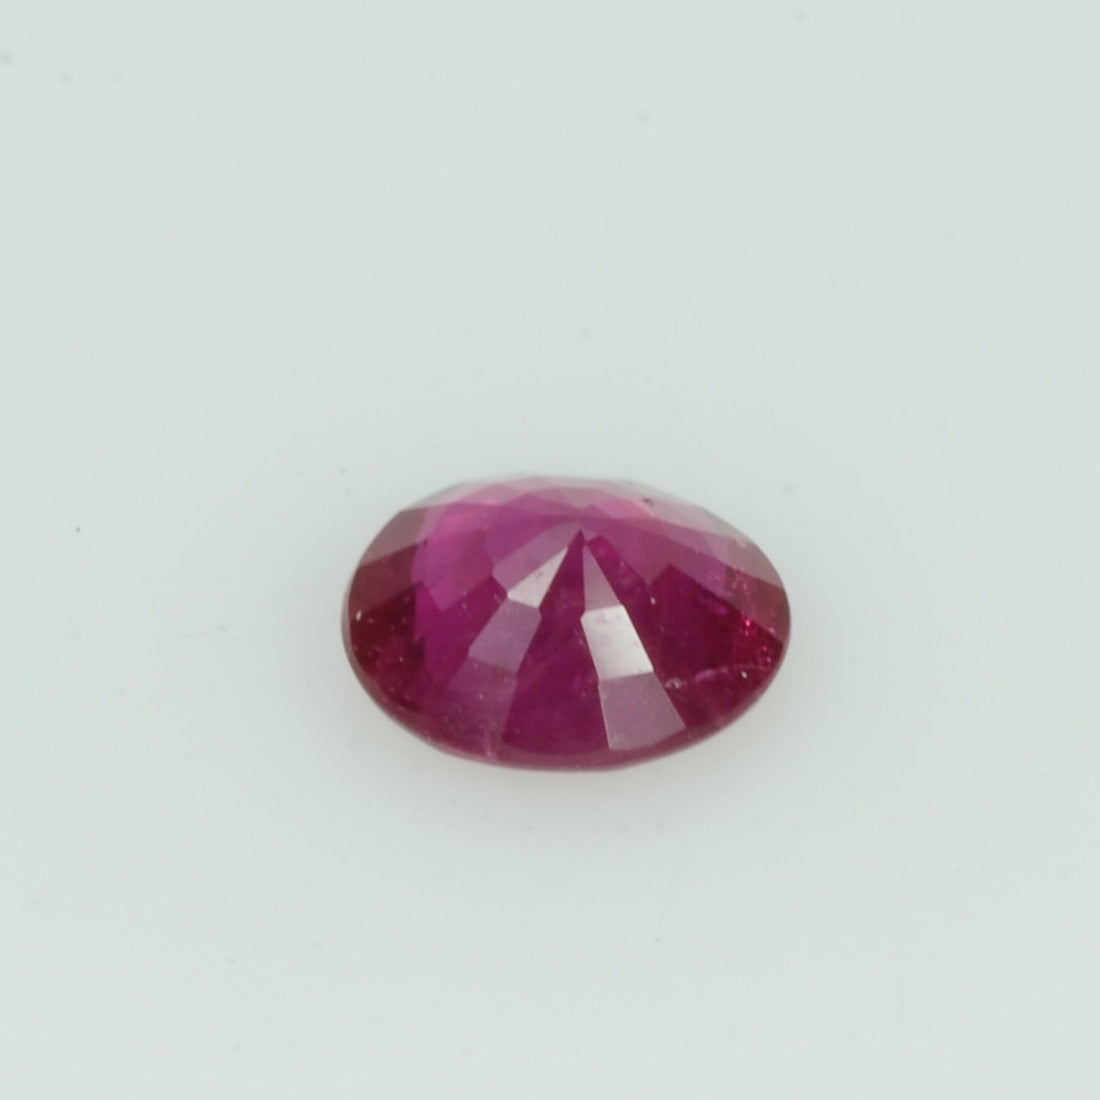 0.39 Cts Natural Vietnam Ruby Loose Gemstone Oval Cut